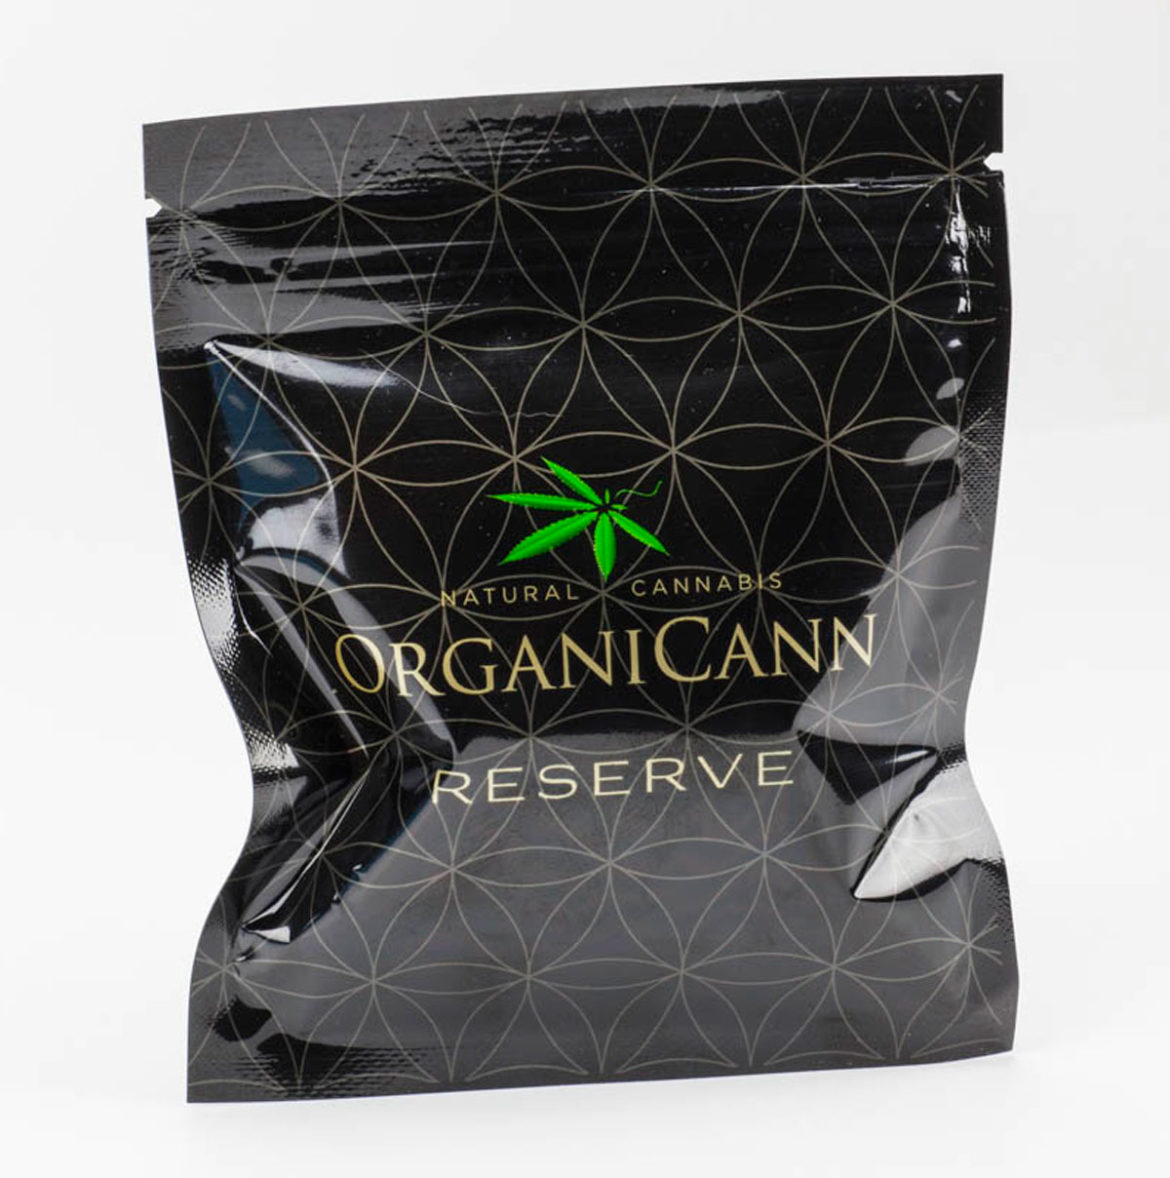 Front side of Organicann packaging design